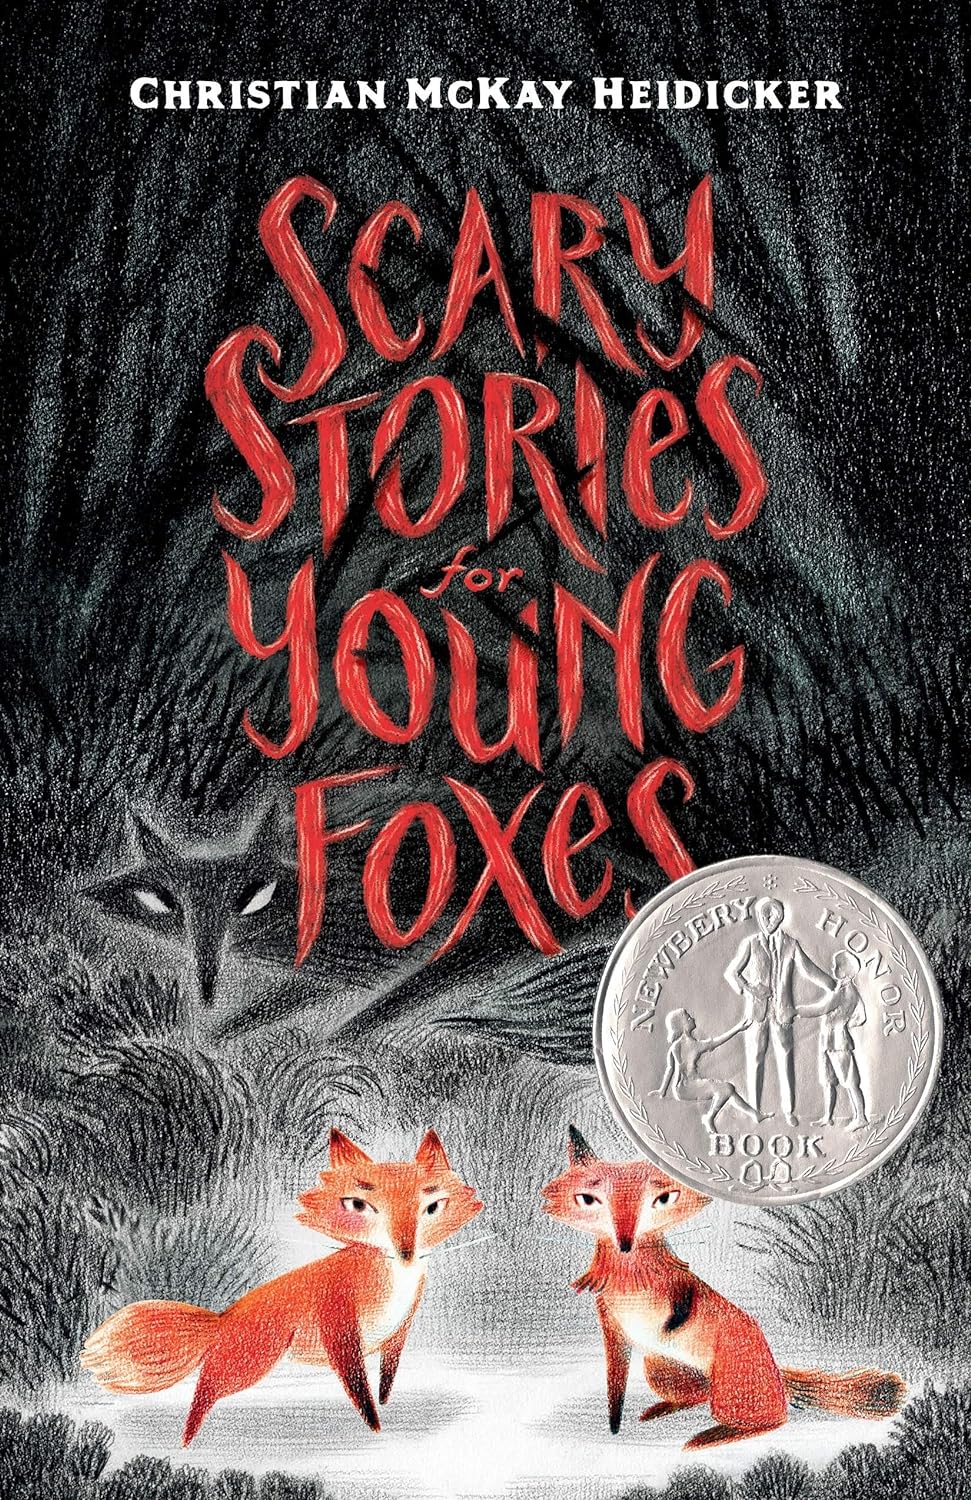 Newbery 수상작 Scary Stories for Young Foxes